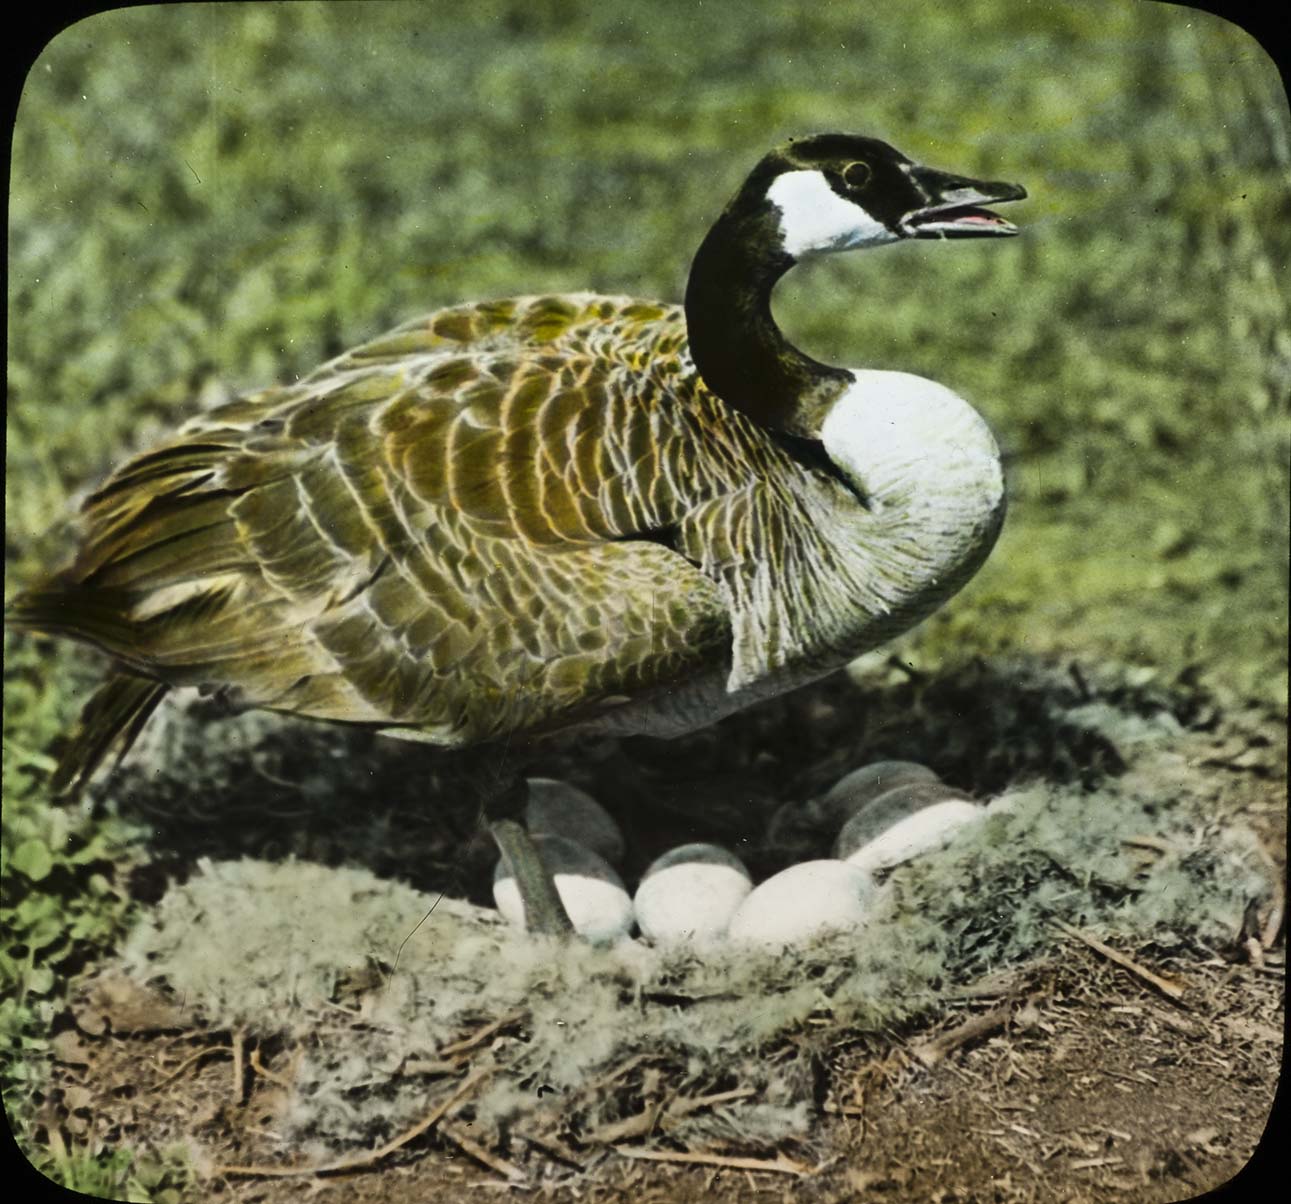 Lantern slide and photograph of a Canada Goose on a nest